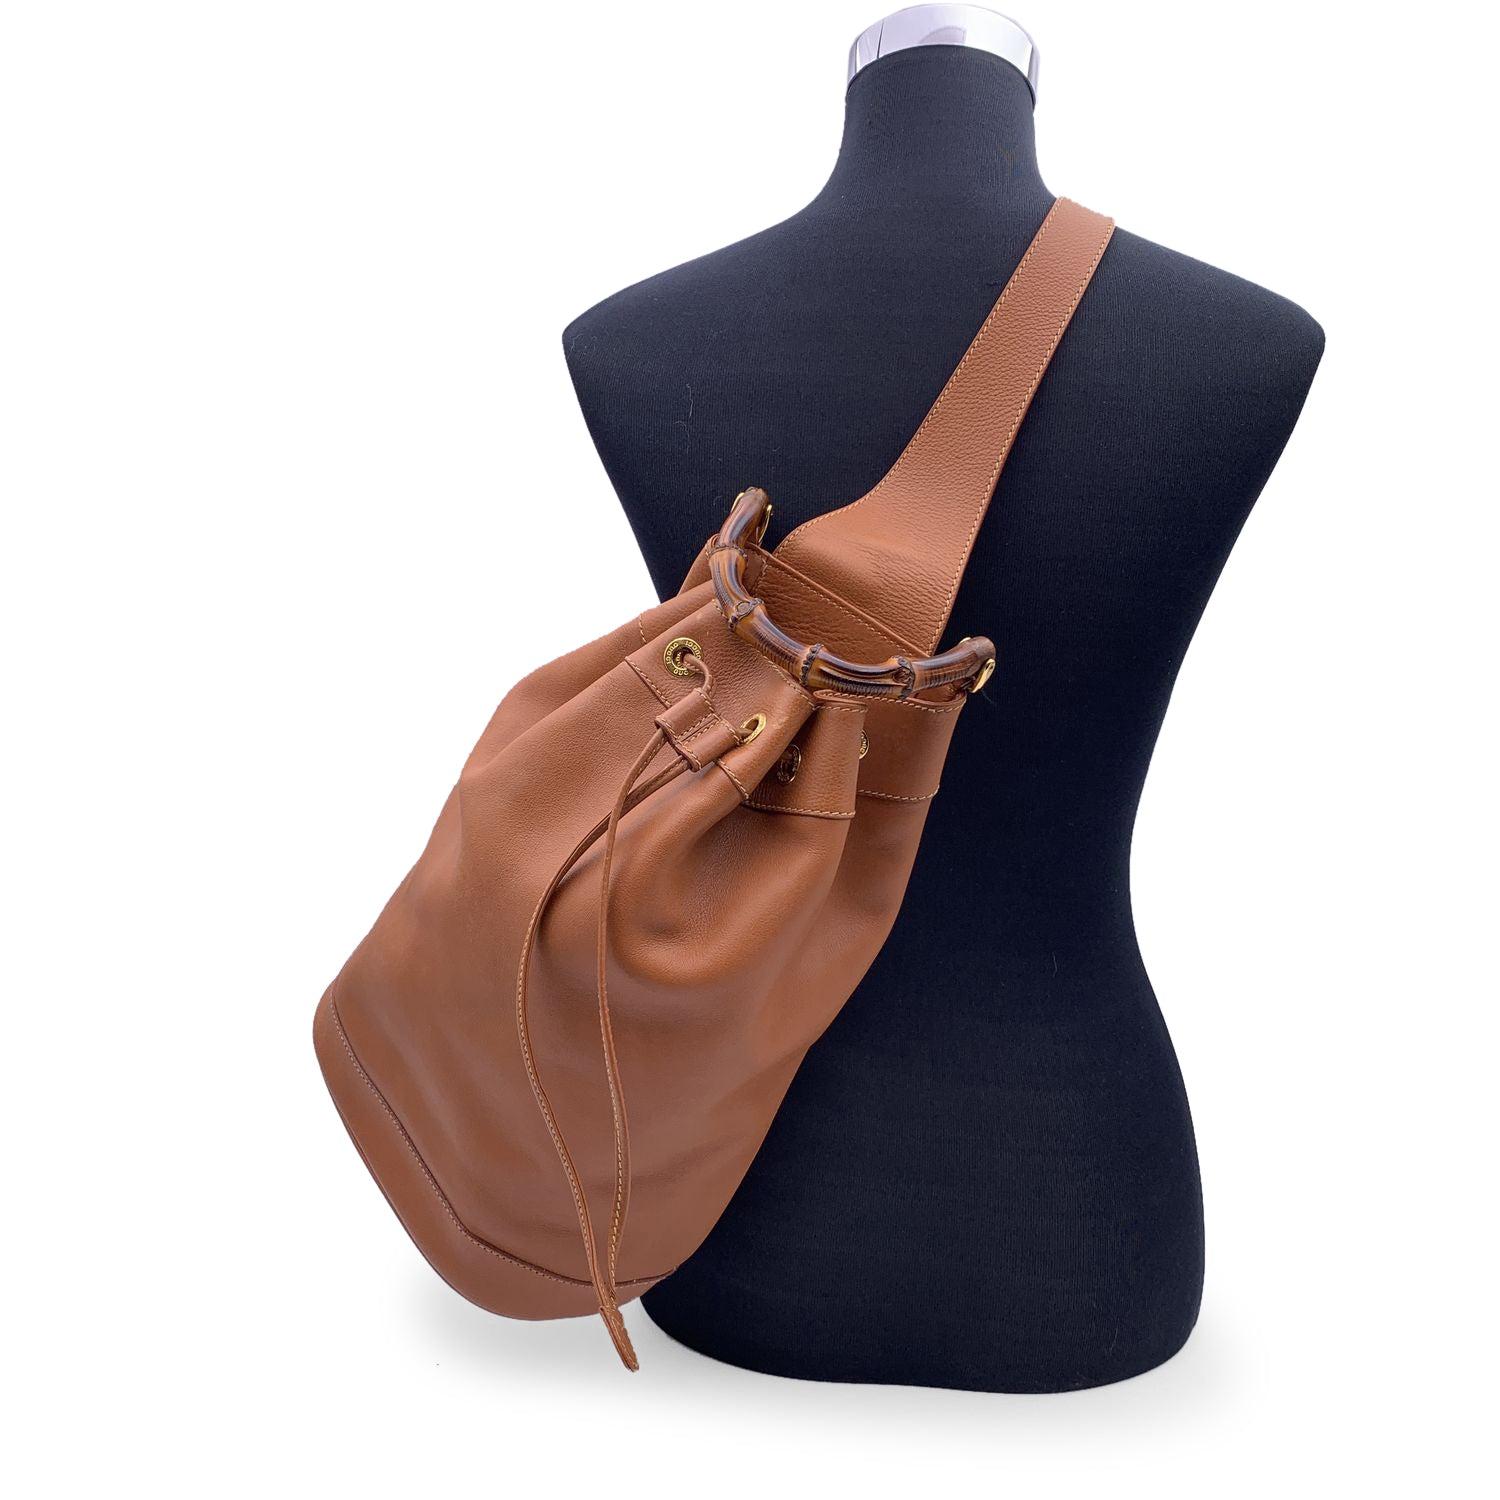 Vintage GUCCI bucket one shoulder backpack is crafted of soft smooth calfskin leather in tan color. It features gold metal hardware and a bamboo handle. Drawstring closure on top. Unlined interior with a detachable zippered pouch. Adjustable